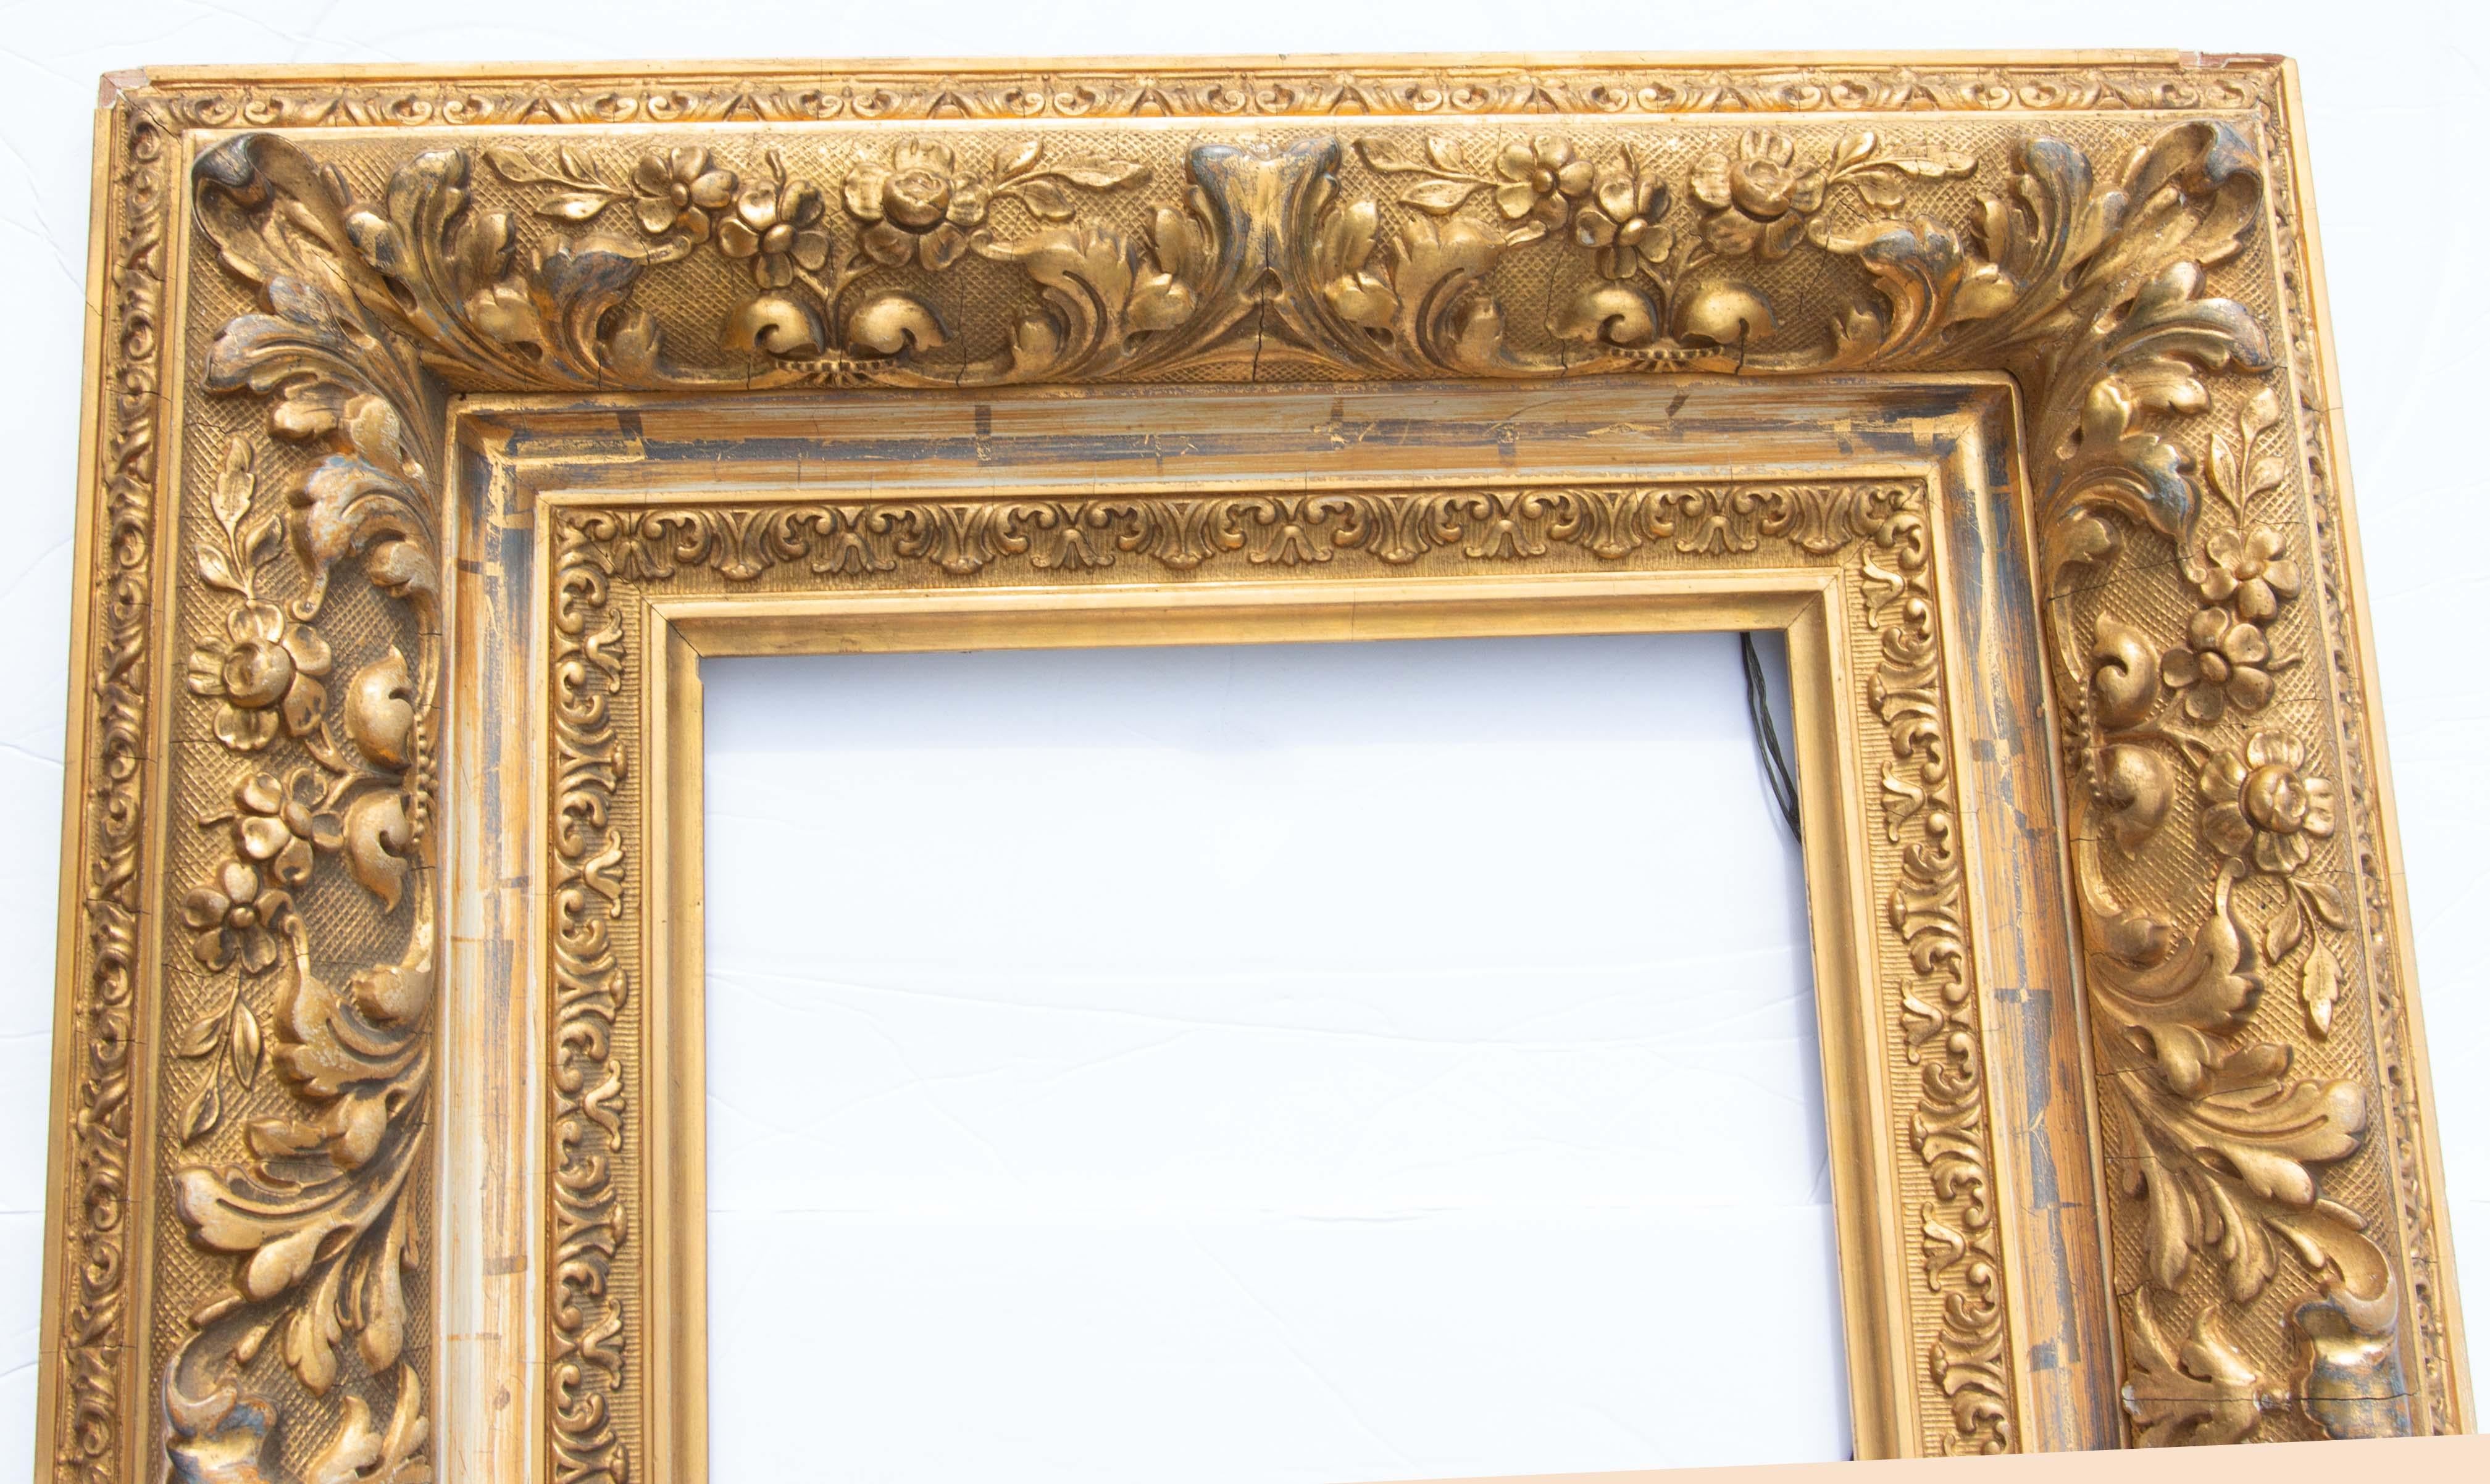 19th century gold leaf picture frame. Excellent quality. Good for a 10